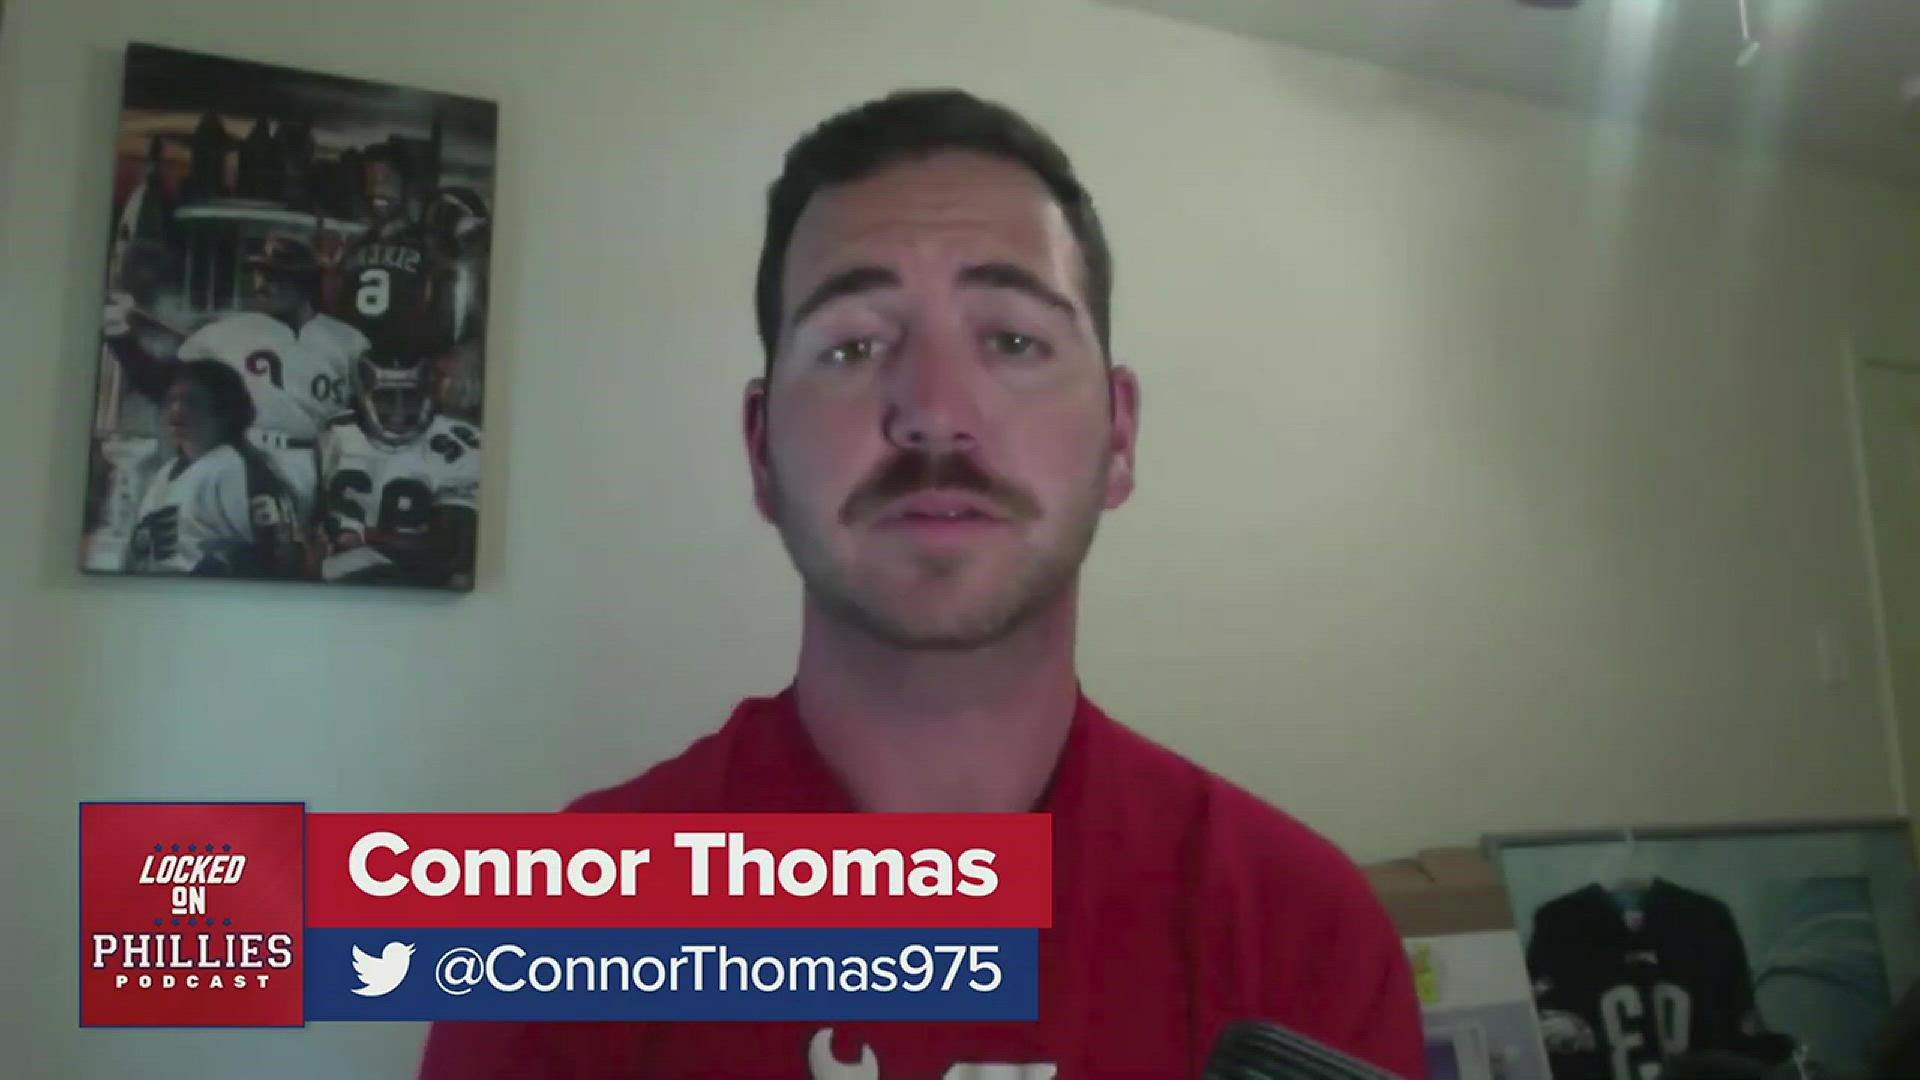 In today's episode, Connor reacts to the game 2 loss by the Philadelphia Phillies behind another anemic offensive performance.